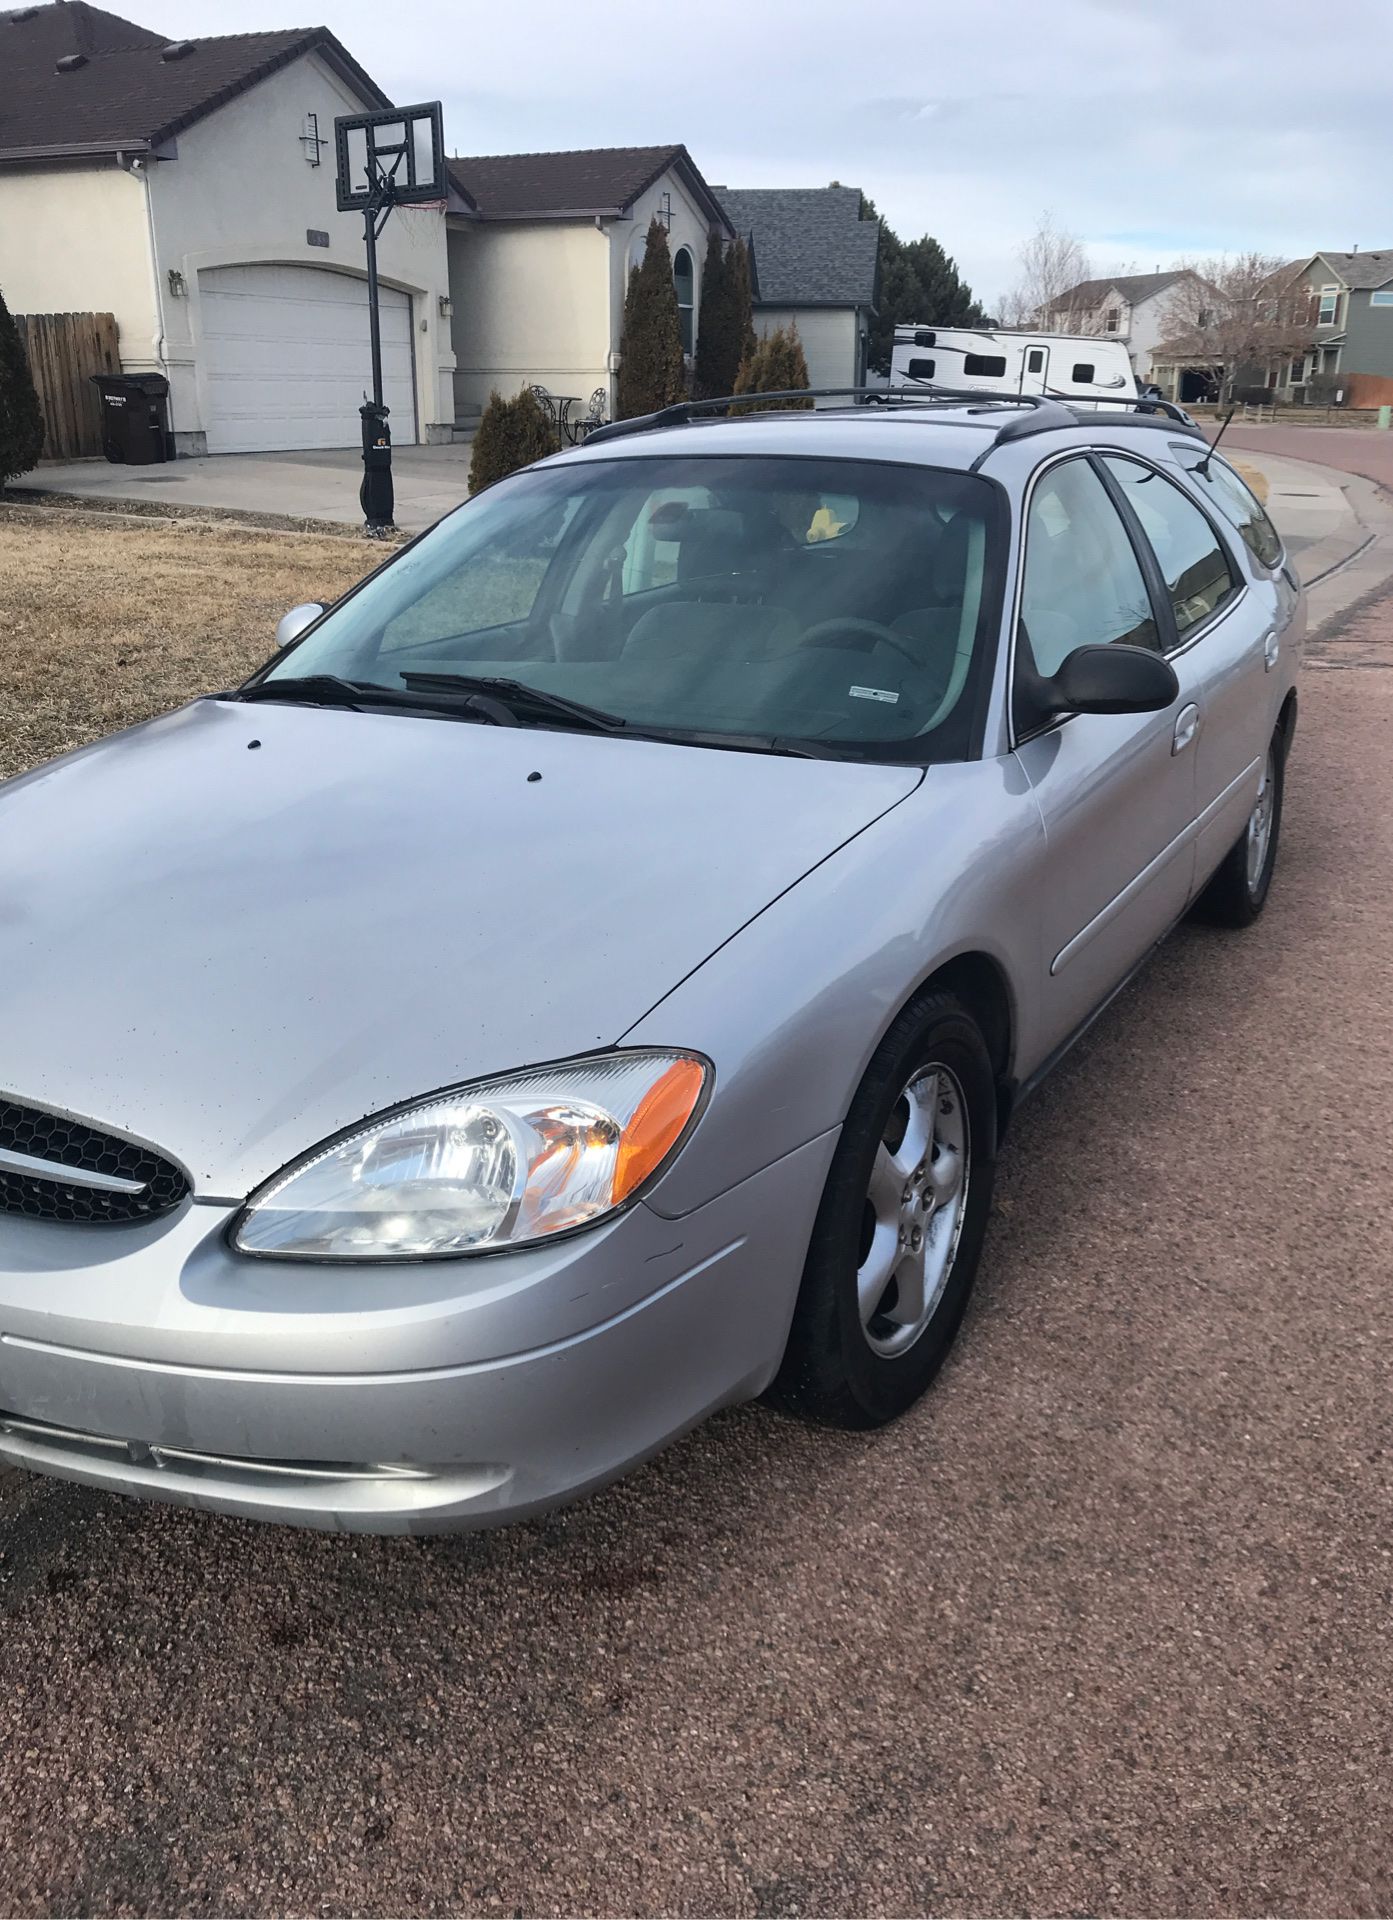 Ford Taurus wagon 2001 for $1900